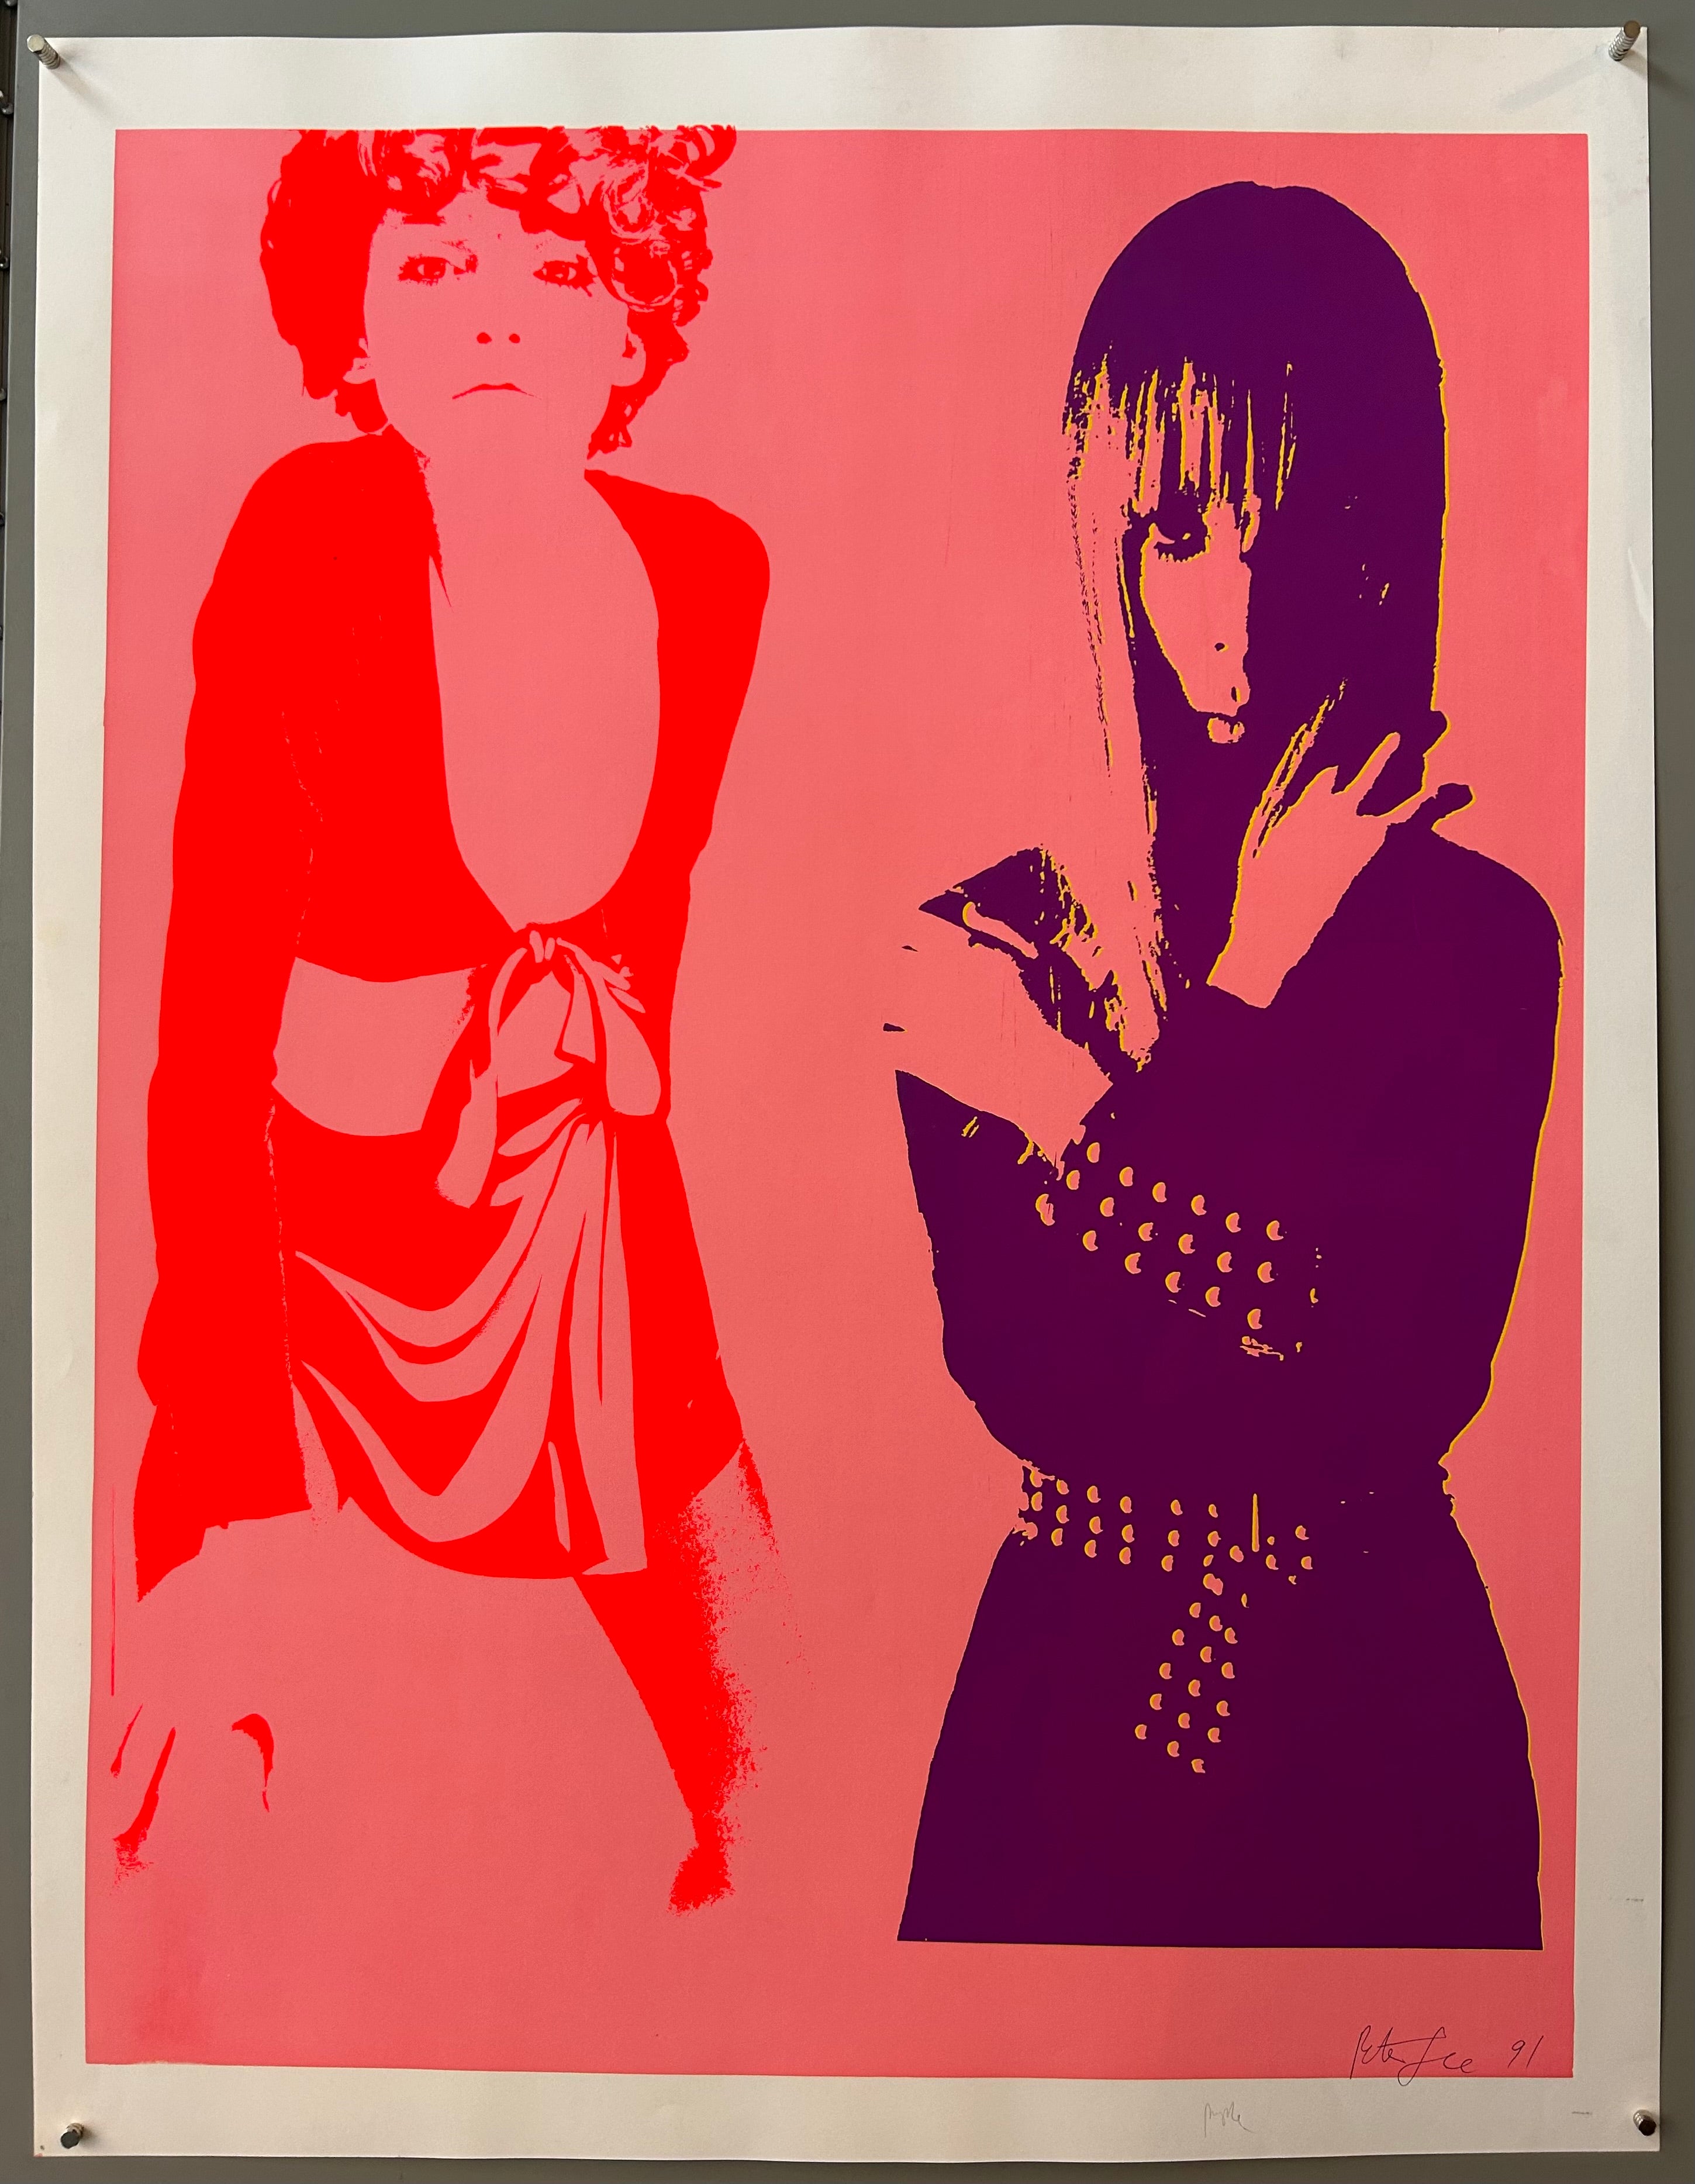 Two pop-art style images of women are side by side, with a pink background. The women are in orange and purple.